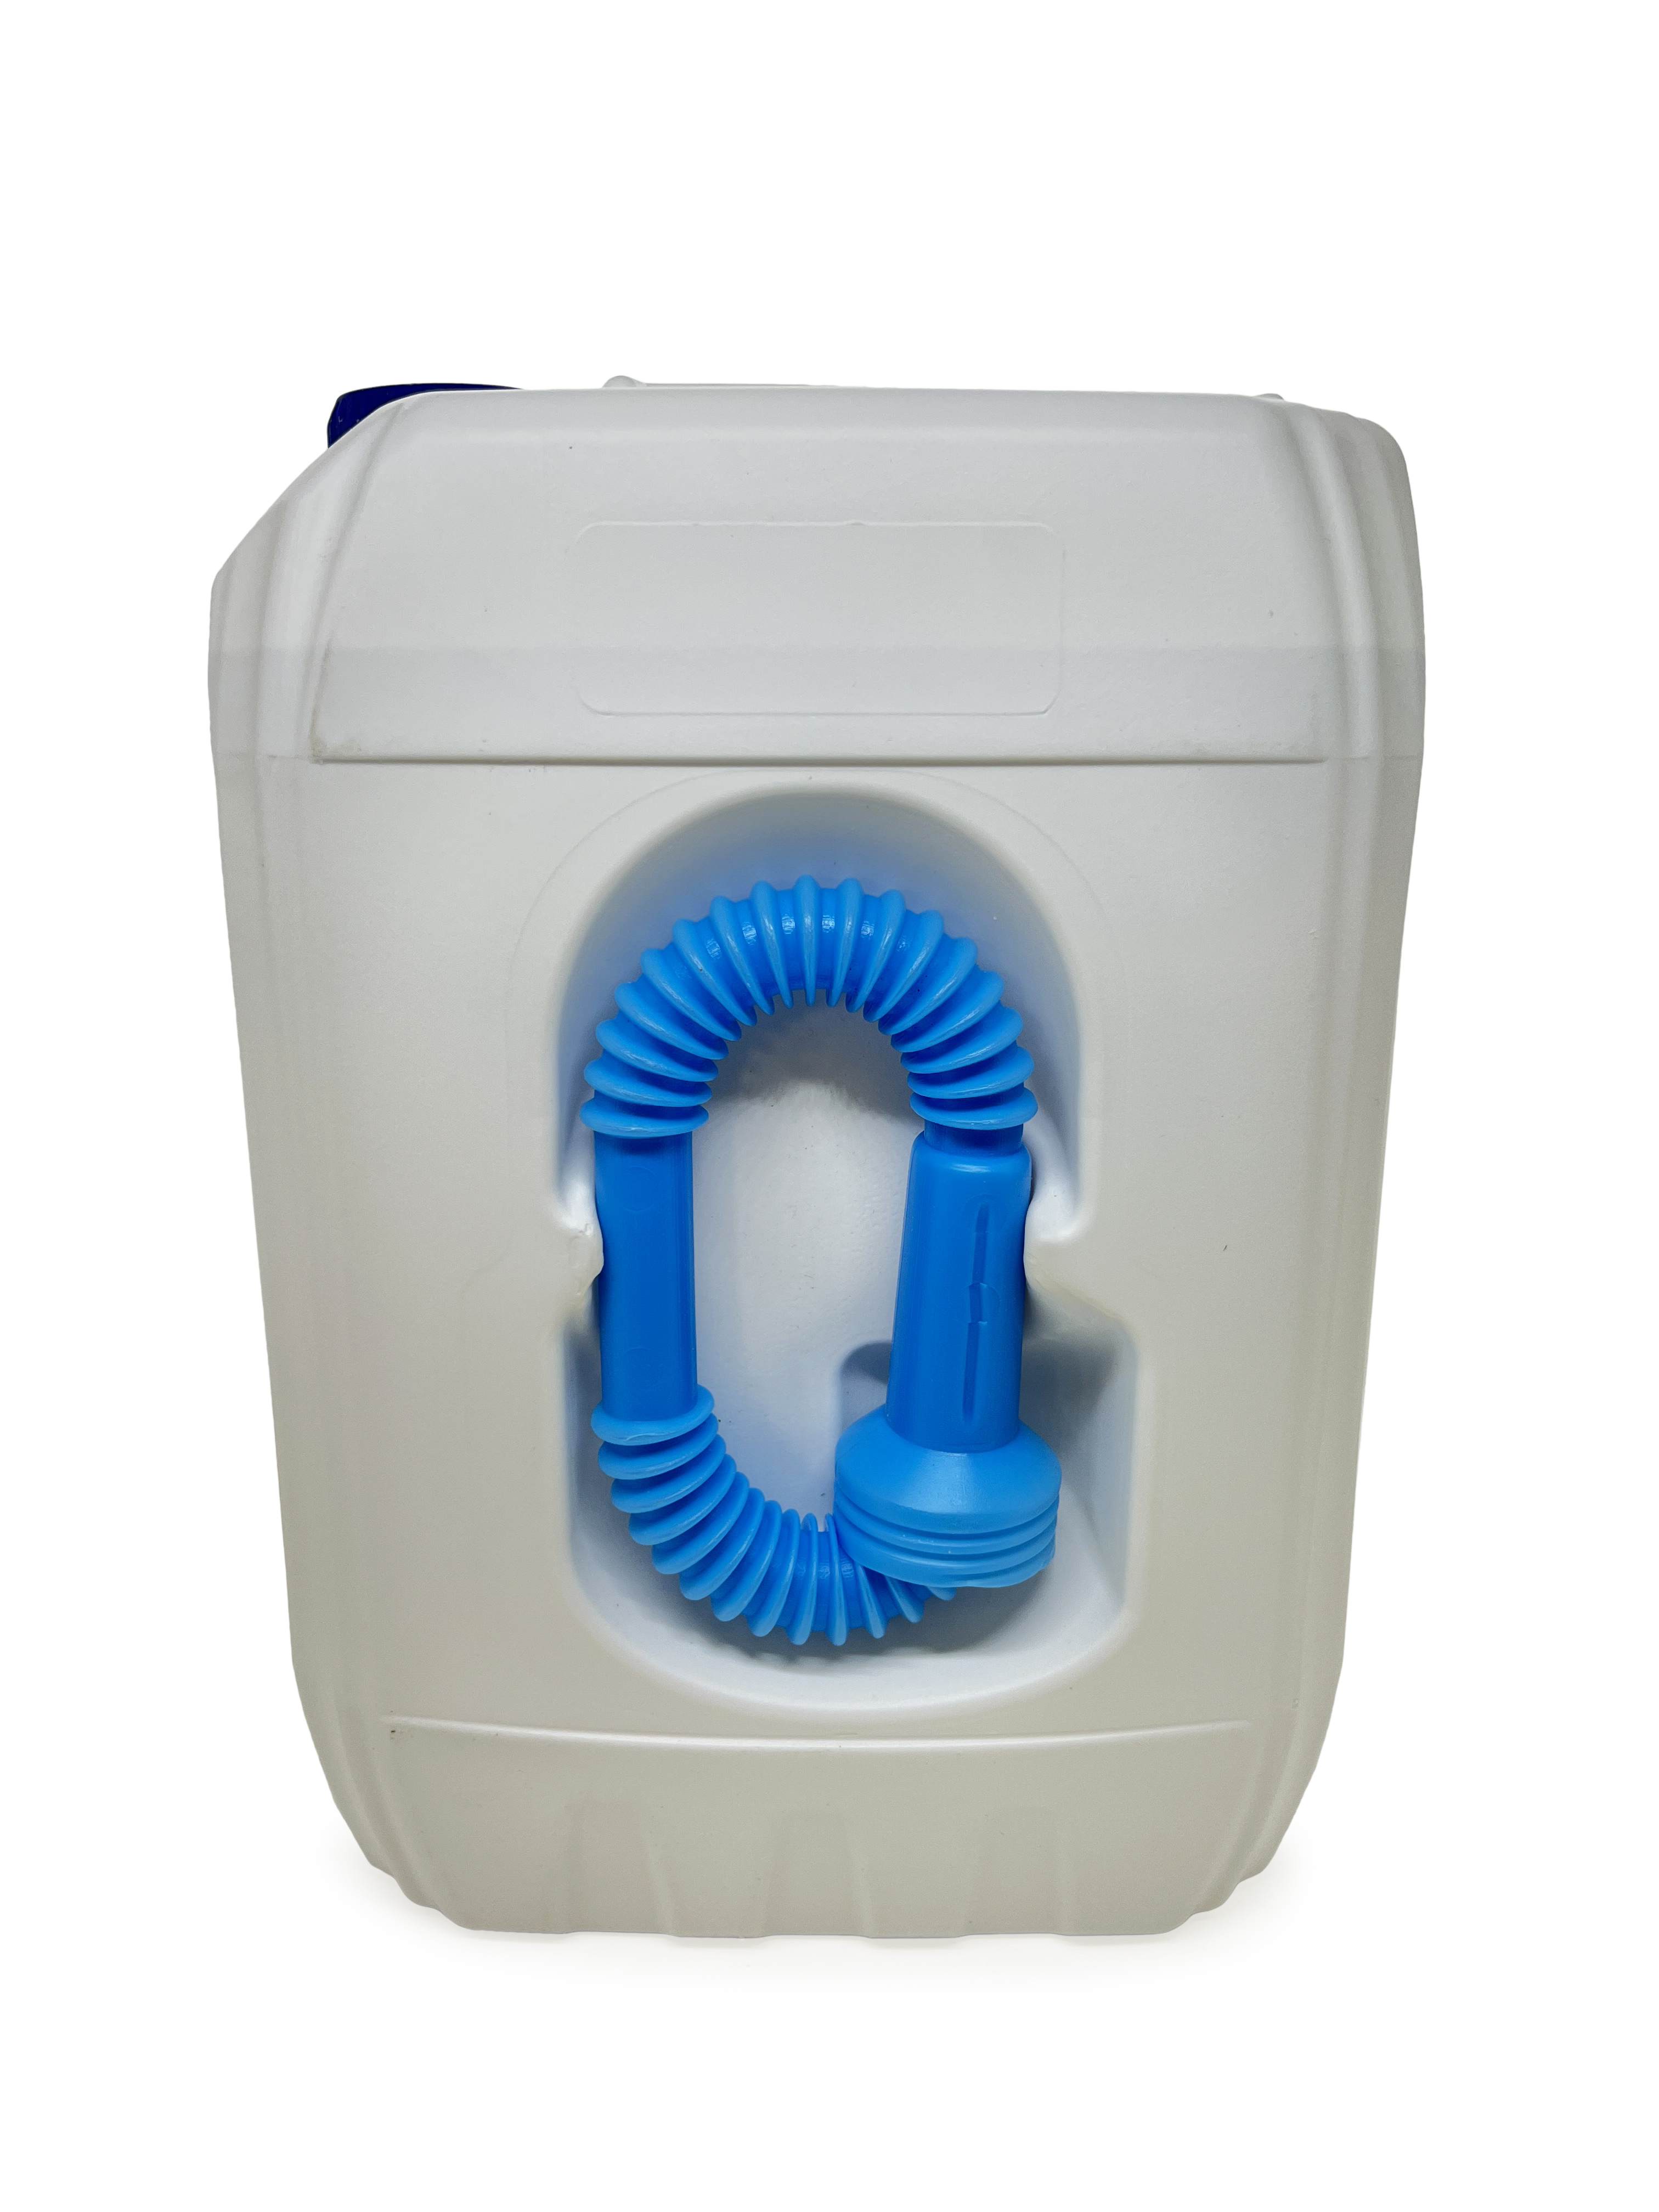 Blue Sky AdBlue® 10L with spout - Viscol Lubricants